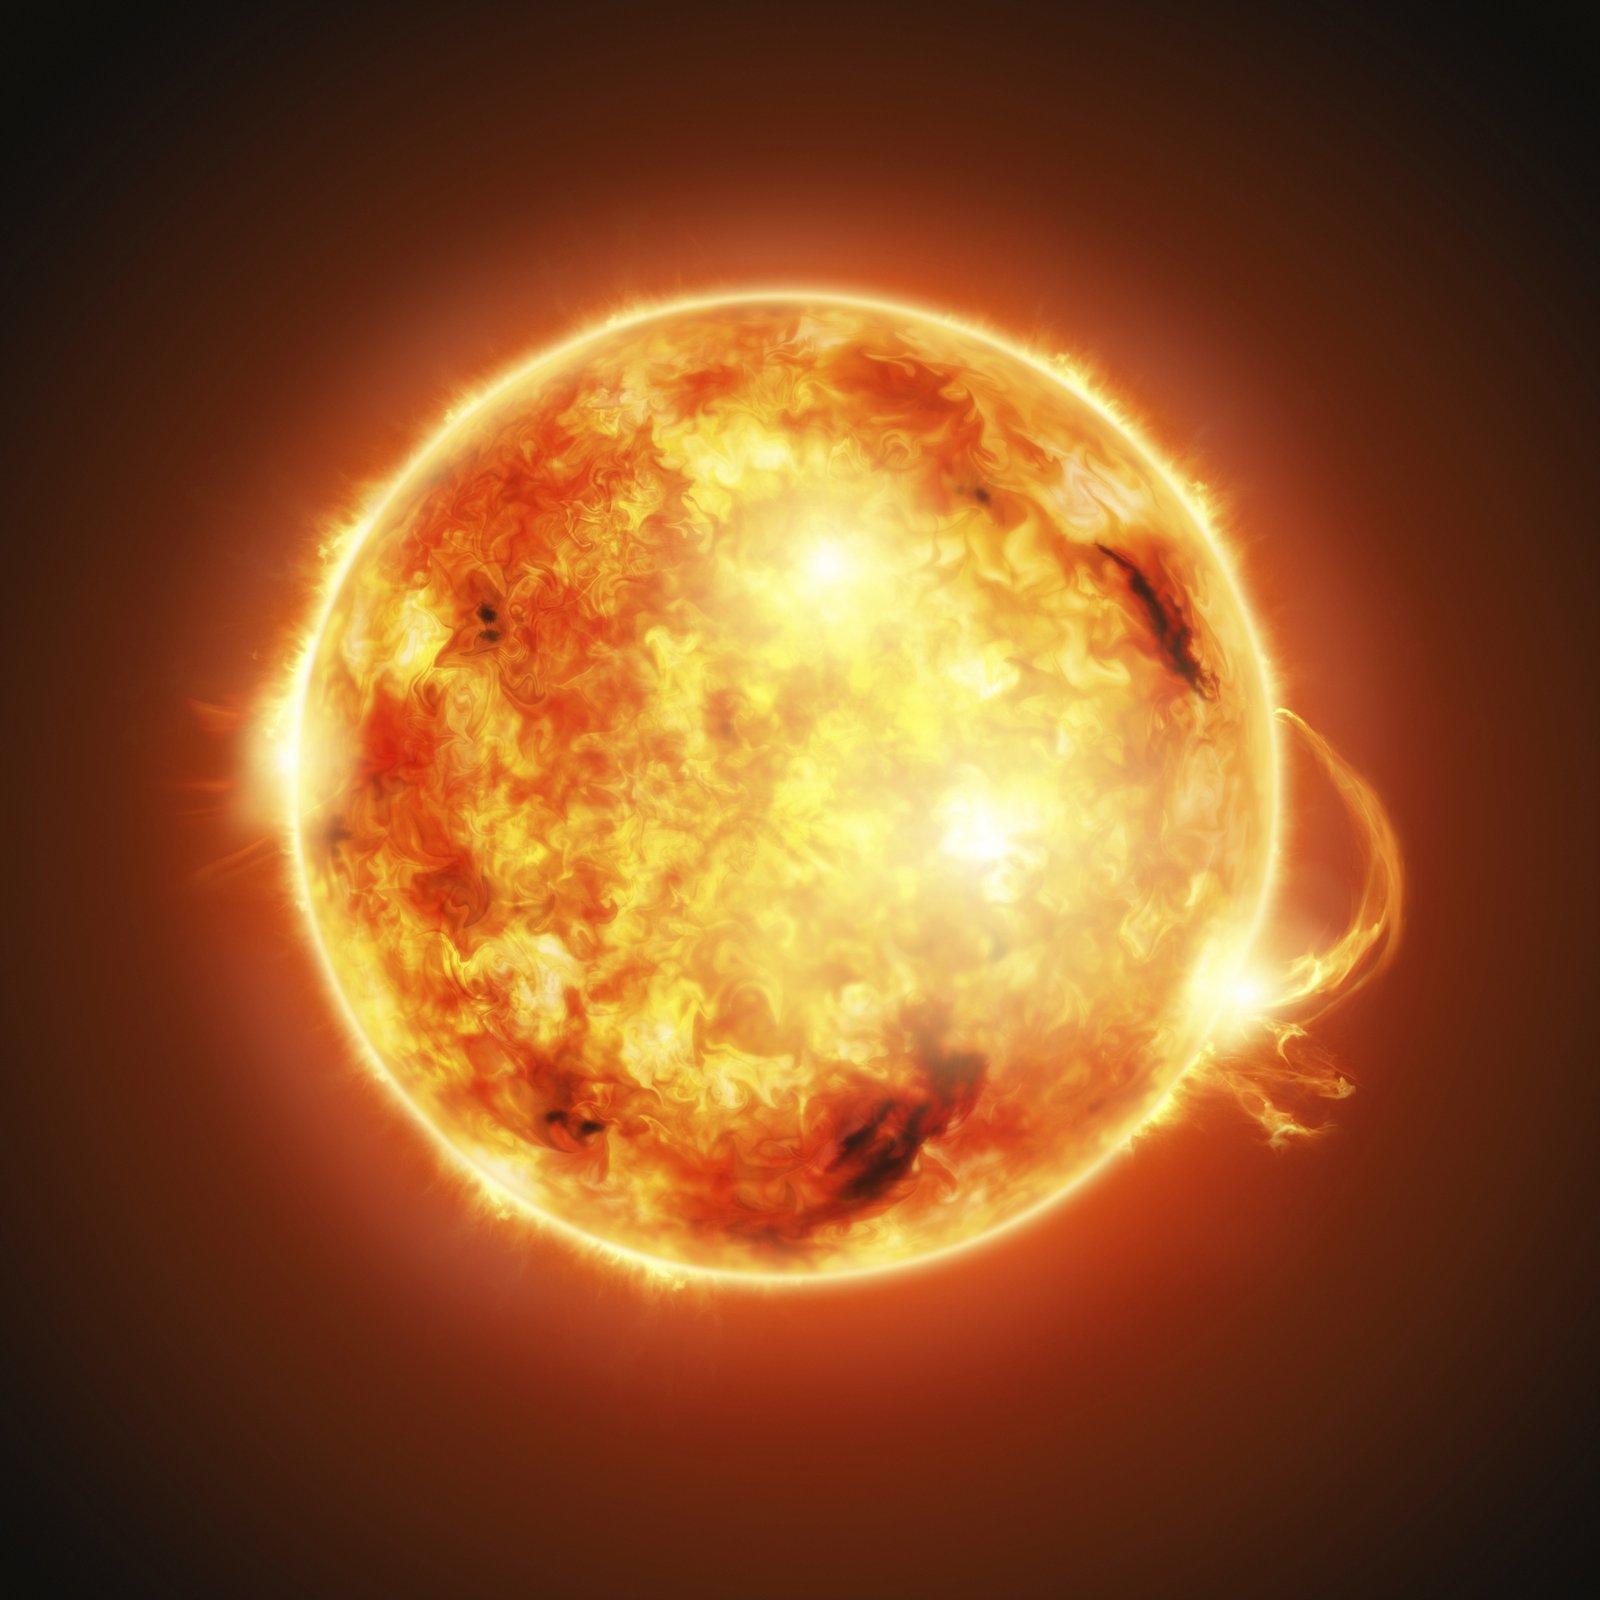 The Sun rotates in the opposite direction to Earth with the Sun rotating from west to east instead of east to west like Earth.